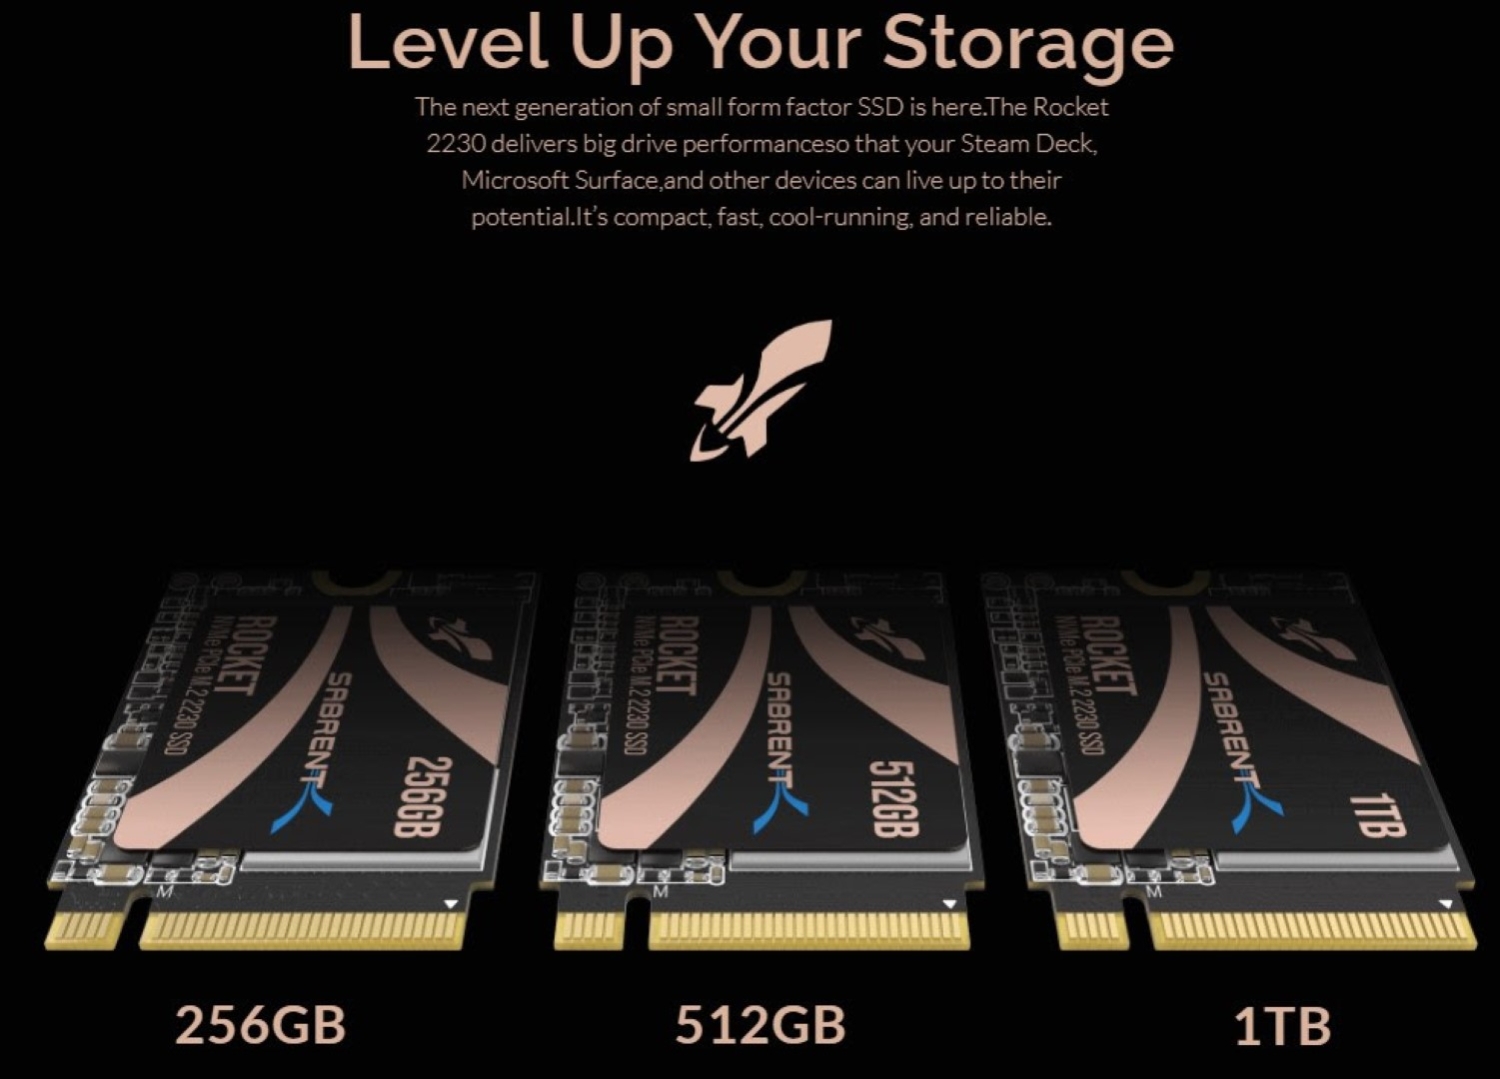 https://static.tweaktown.com/news/8/9/89828_02_sabrents-new-rocket-2230-ssd-5gb-sec-for-your-steam-deck-laptops-and-more_full.jpg